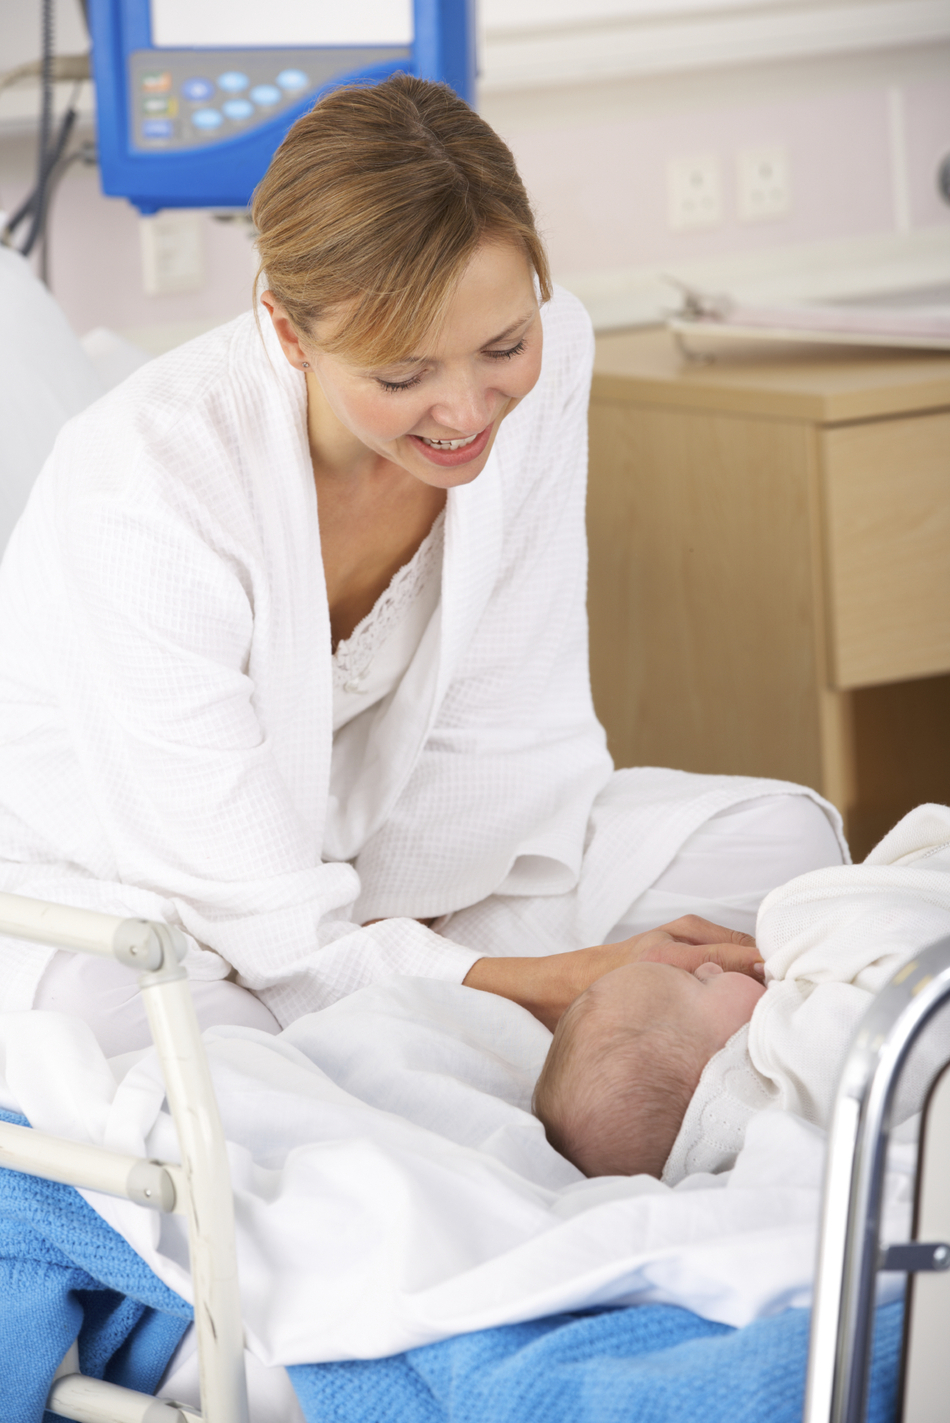 Women Should Rest for a Month After Childbirth—Myth or Fact?